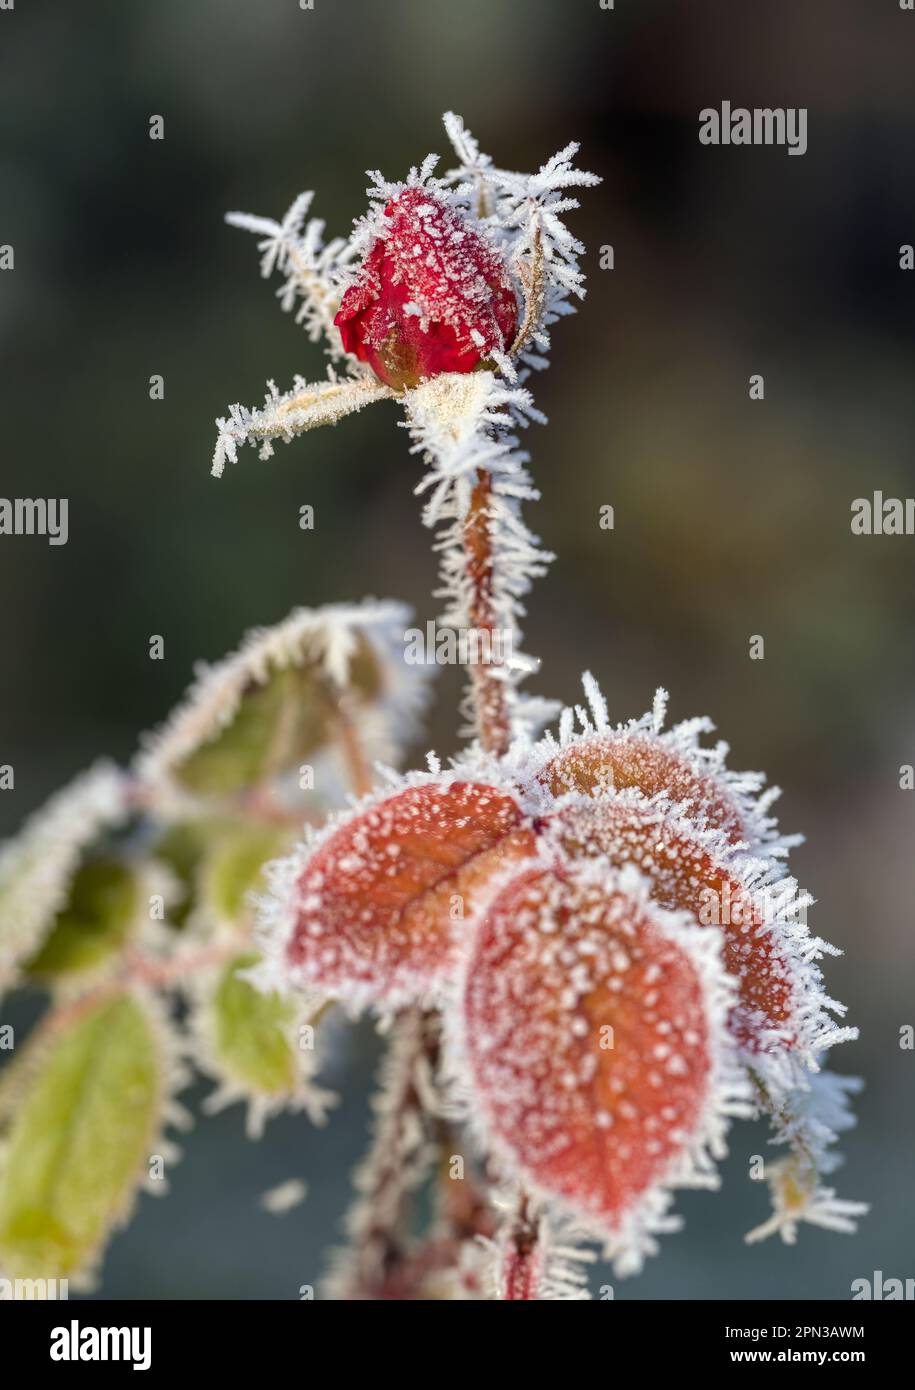 Frozen iced rose buds Stock Photo